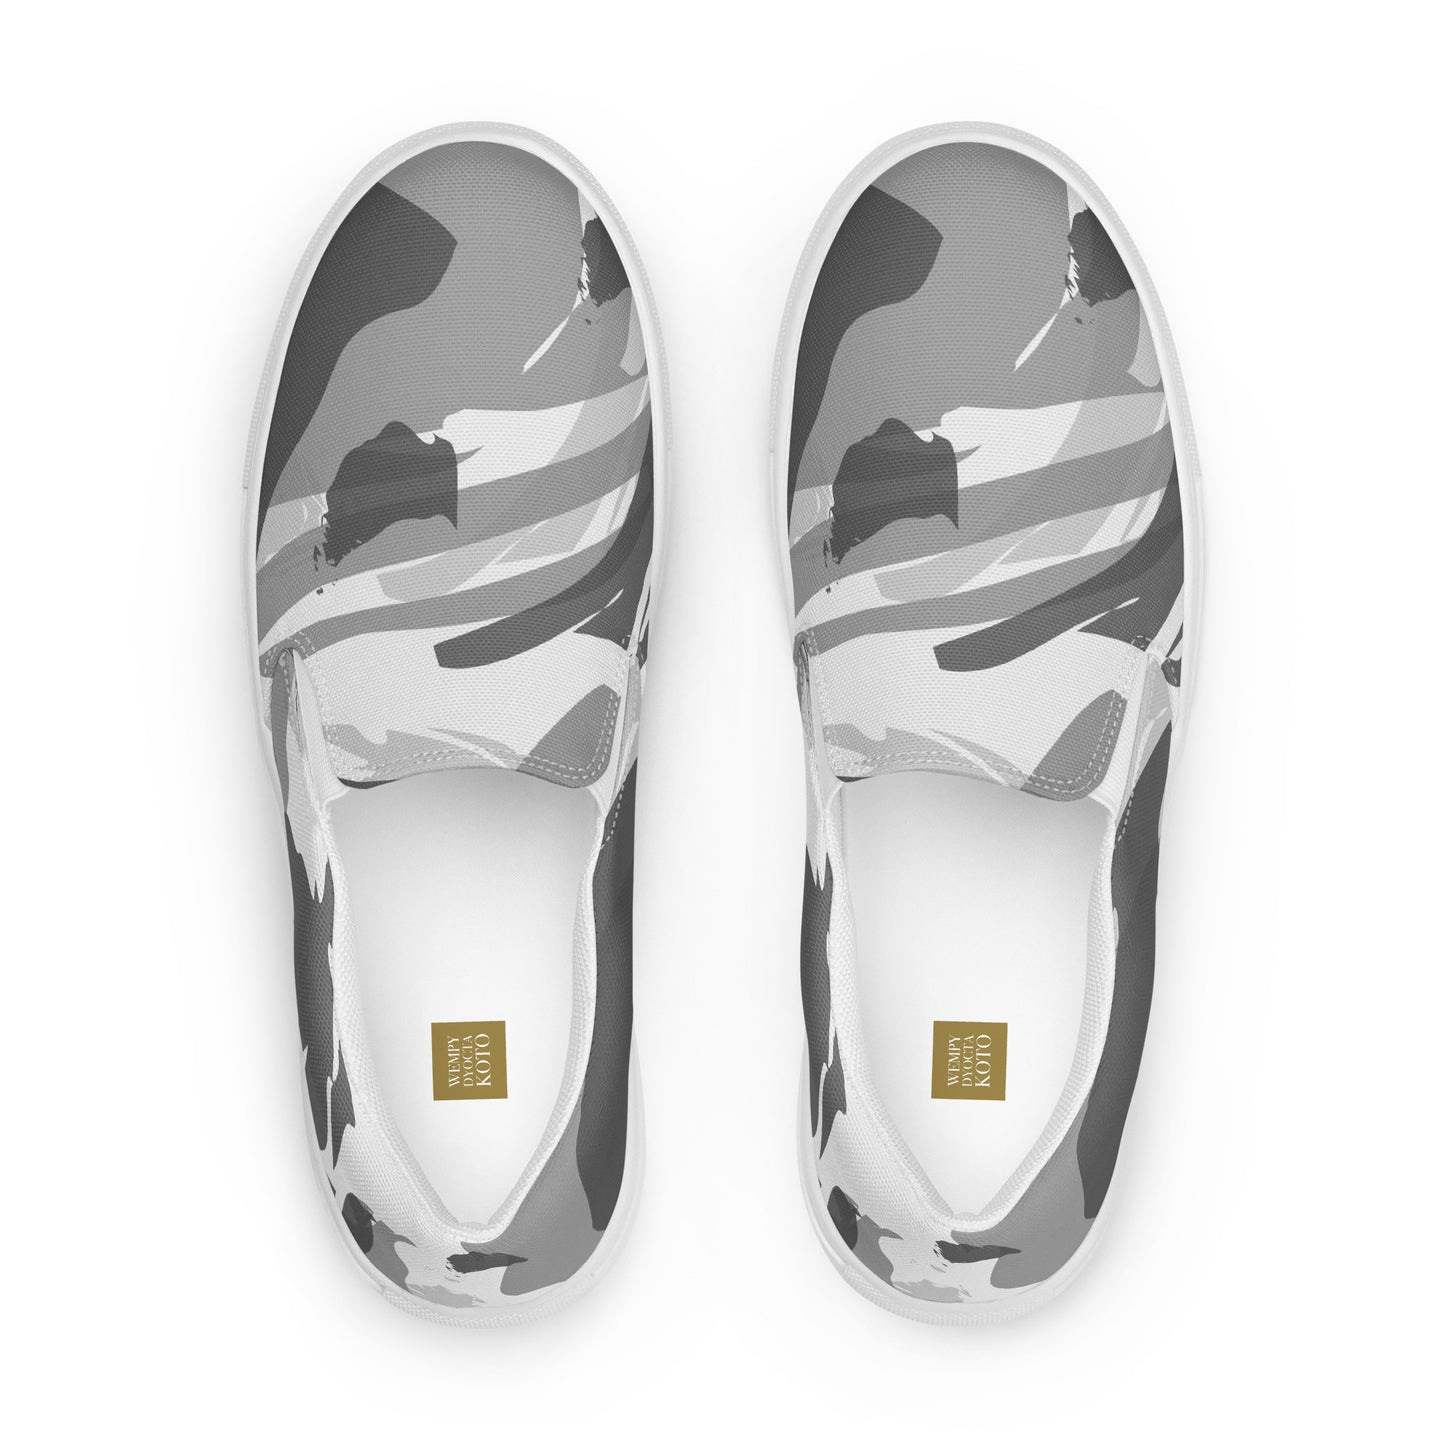 Snow Camo - Sustainably Made Women’s slip-on canvas shoes